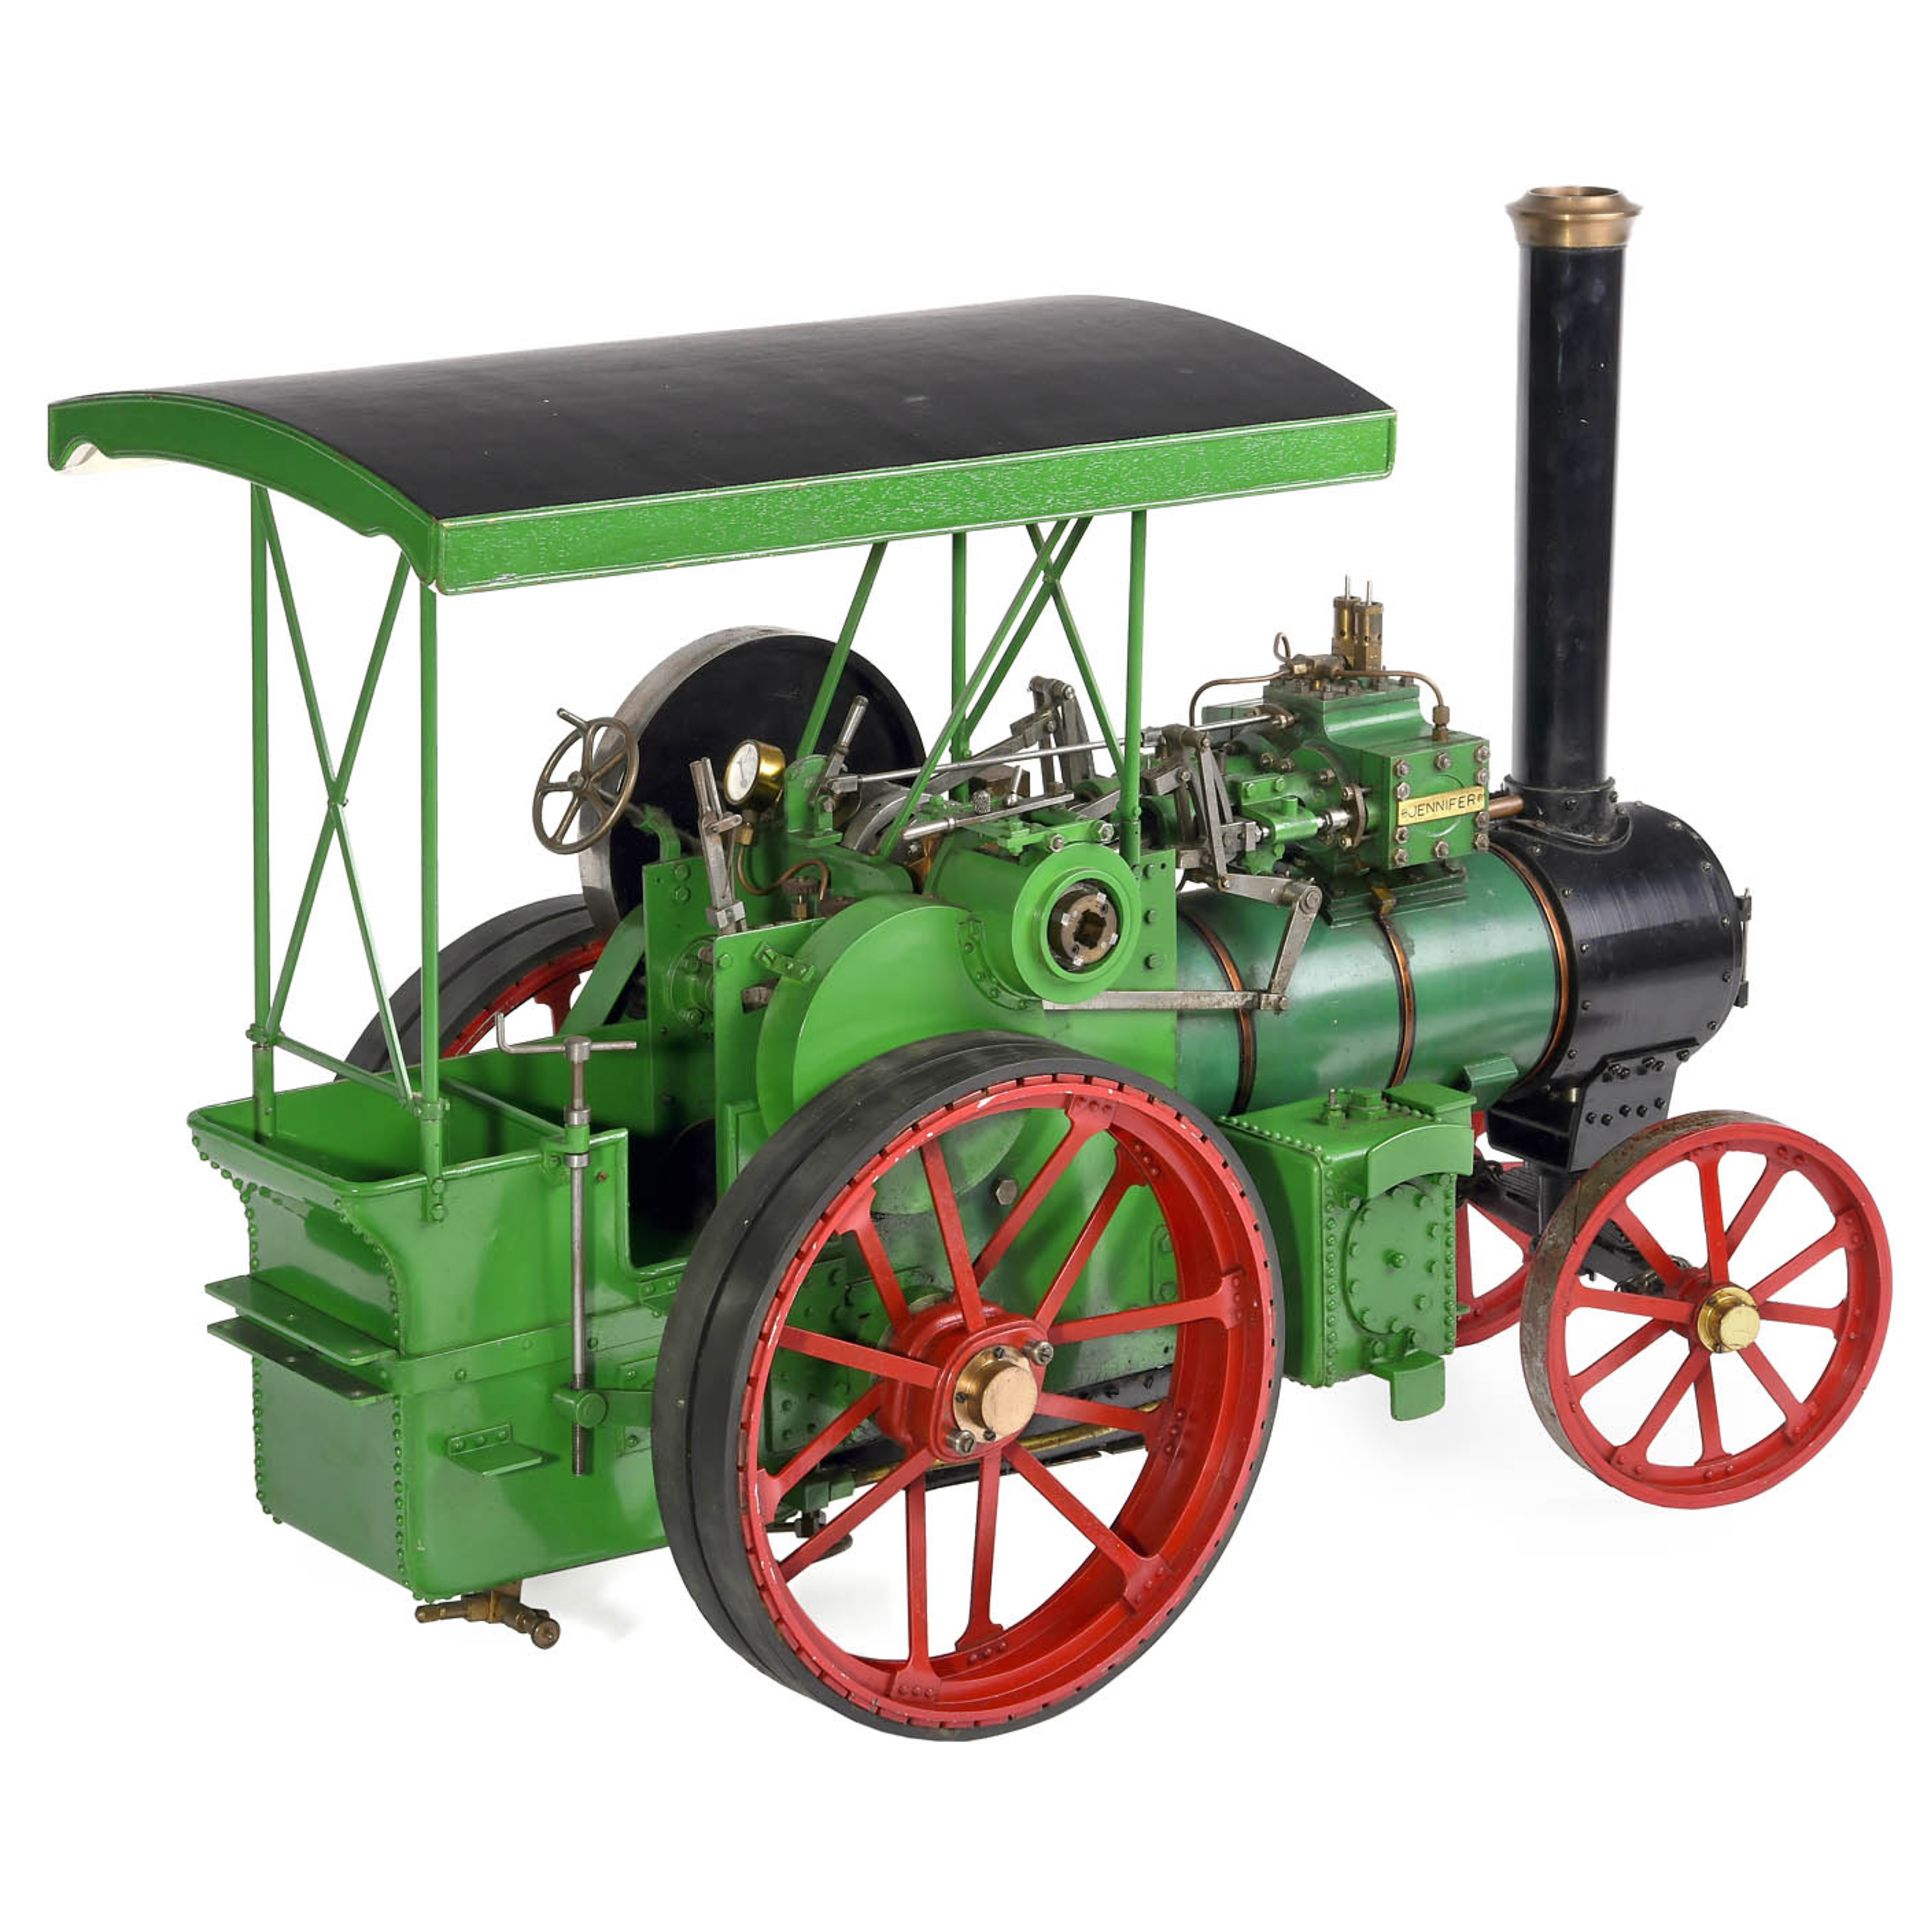 2-inch Scale Model of a Live-Steam Traction Engine "Jenifer", c. 1984 - Image 5 of 10